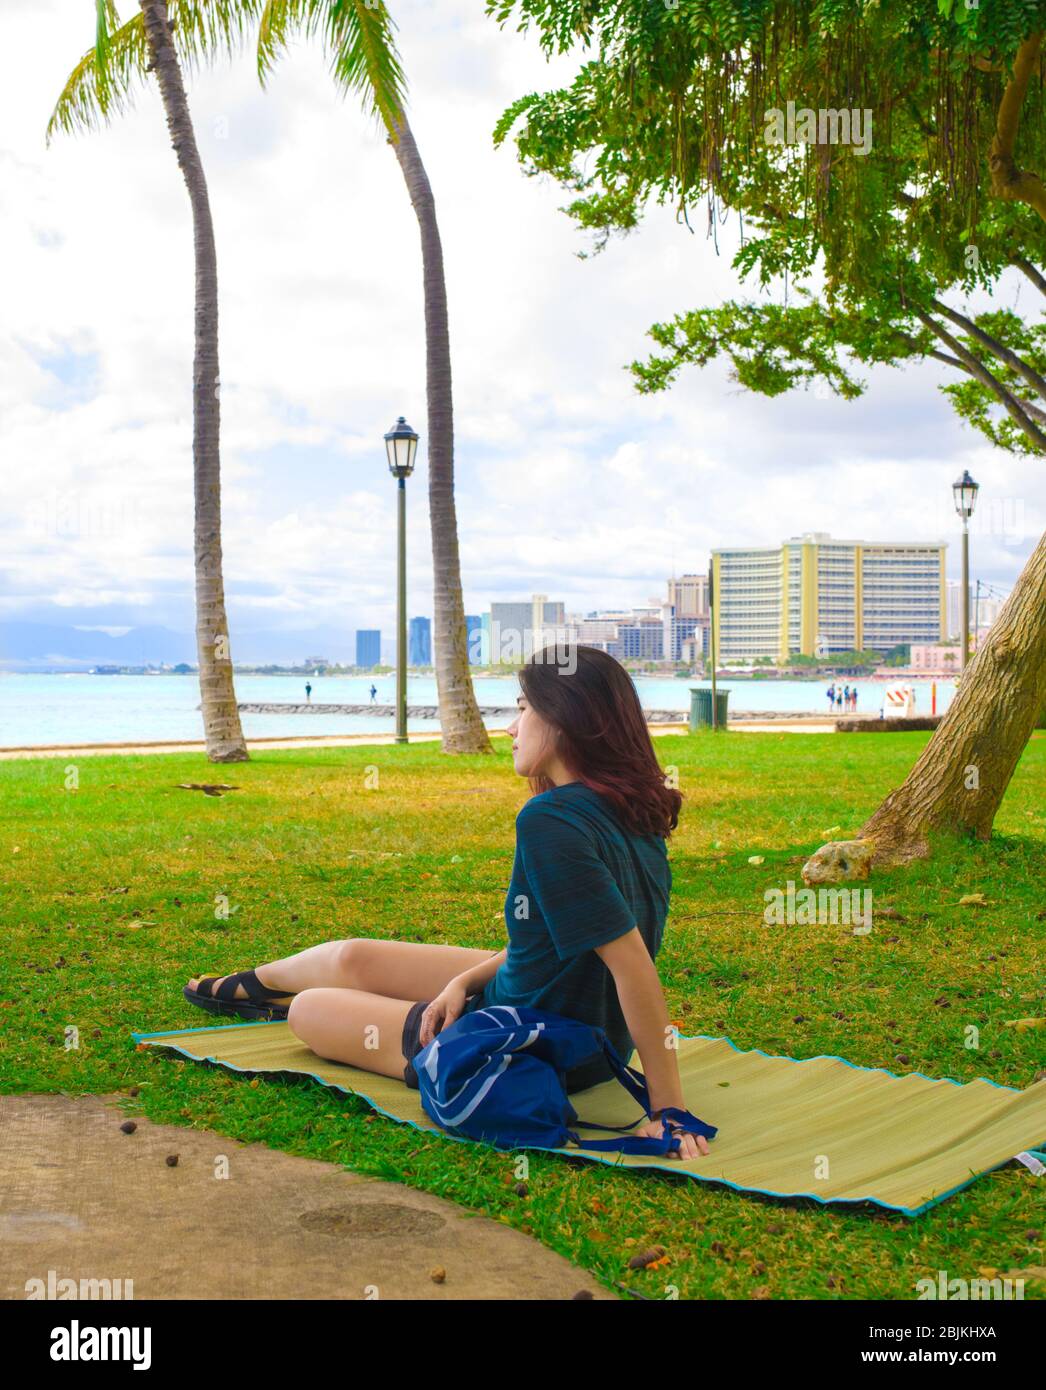 One biracial Asian teenage girl or young adult sitting alone on straw mat on grass lawn at empty Waikiki park looking out at ocean on cloudy overcast Stock Photo